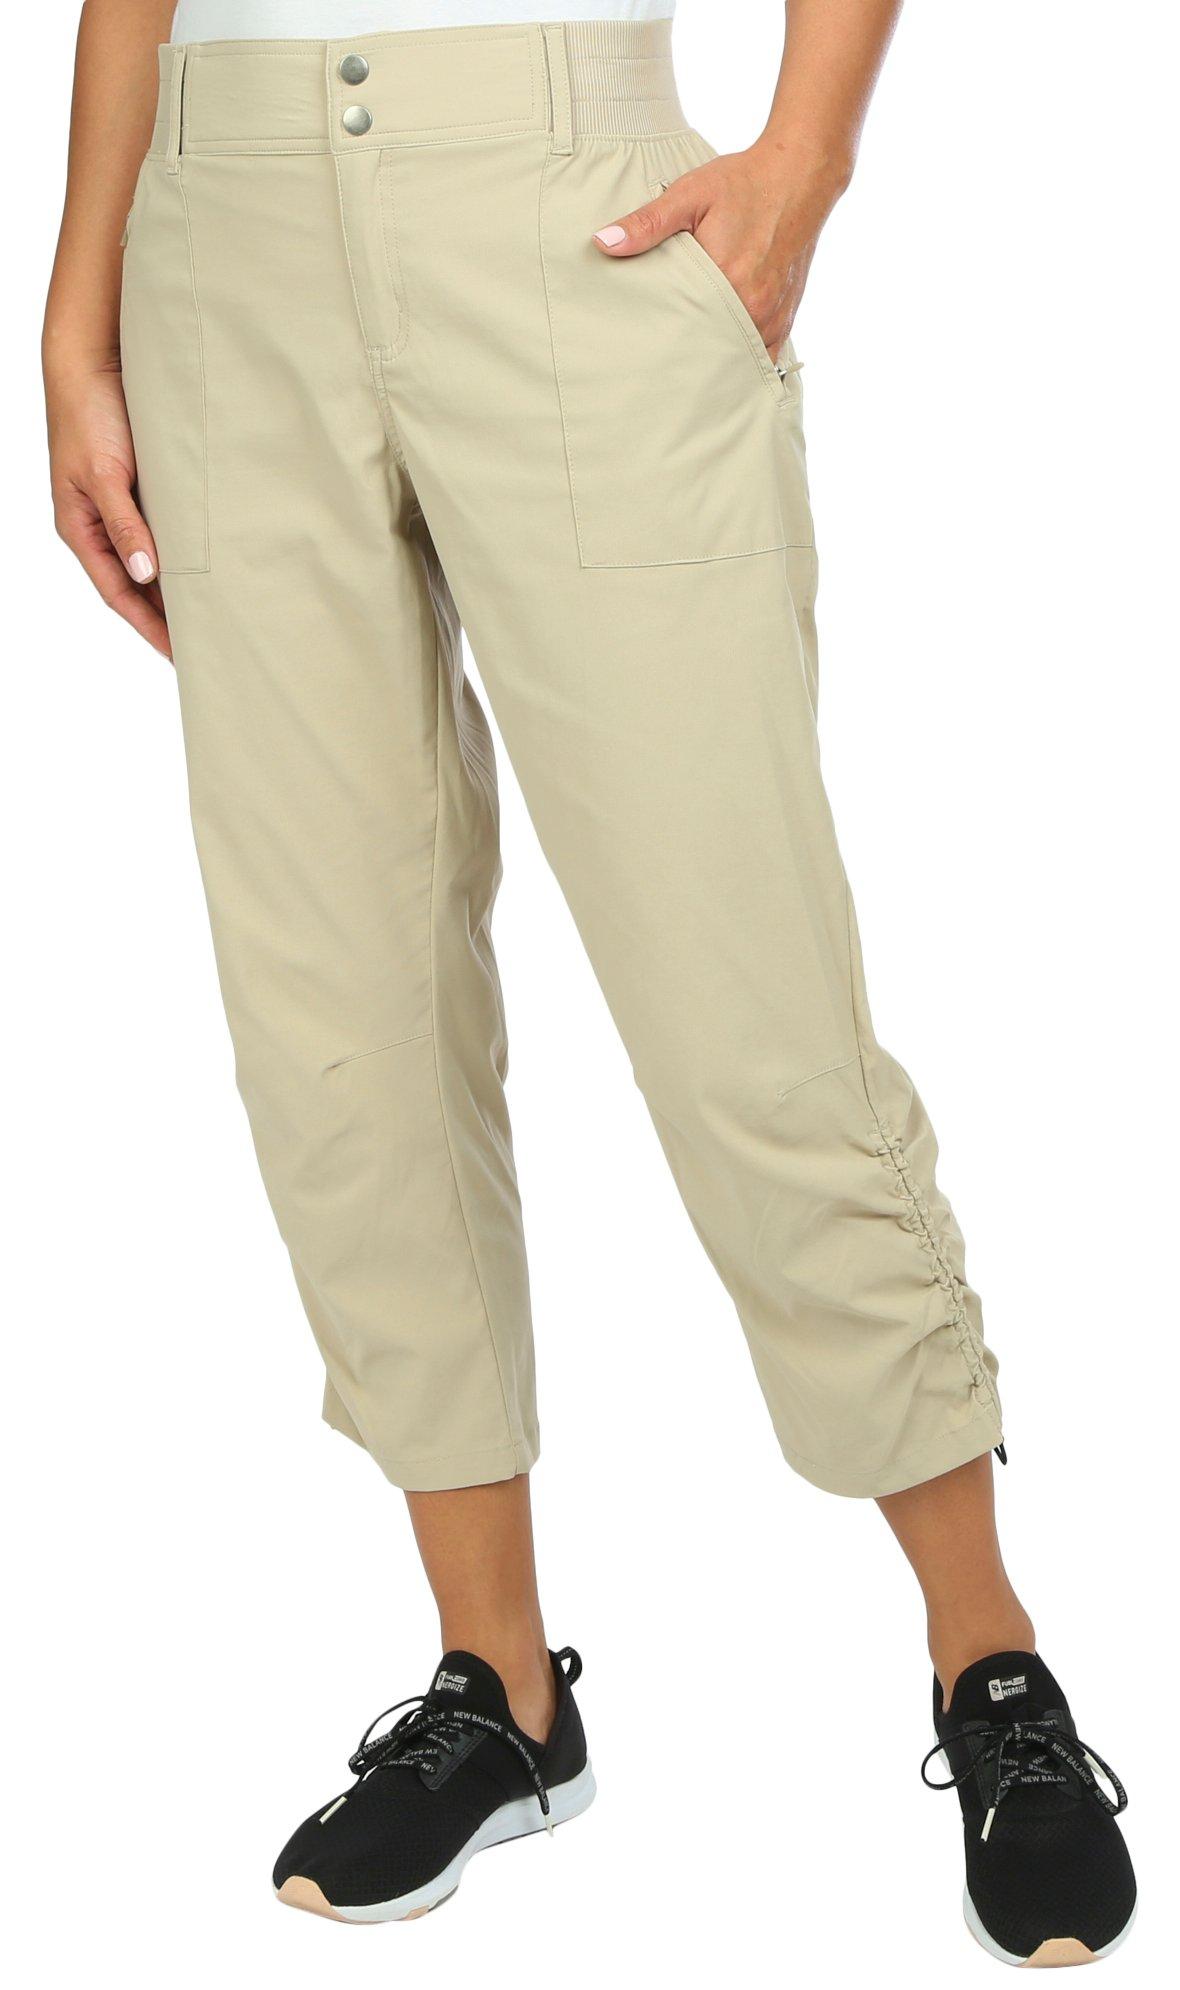 Reel Legends Womens 24 in Solid Cinched Bottom Pants